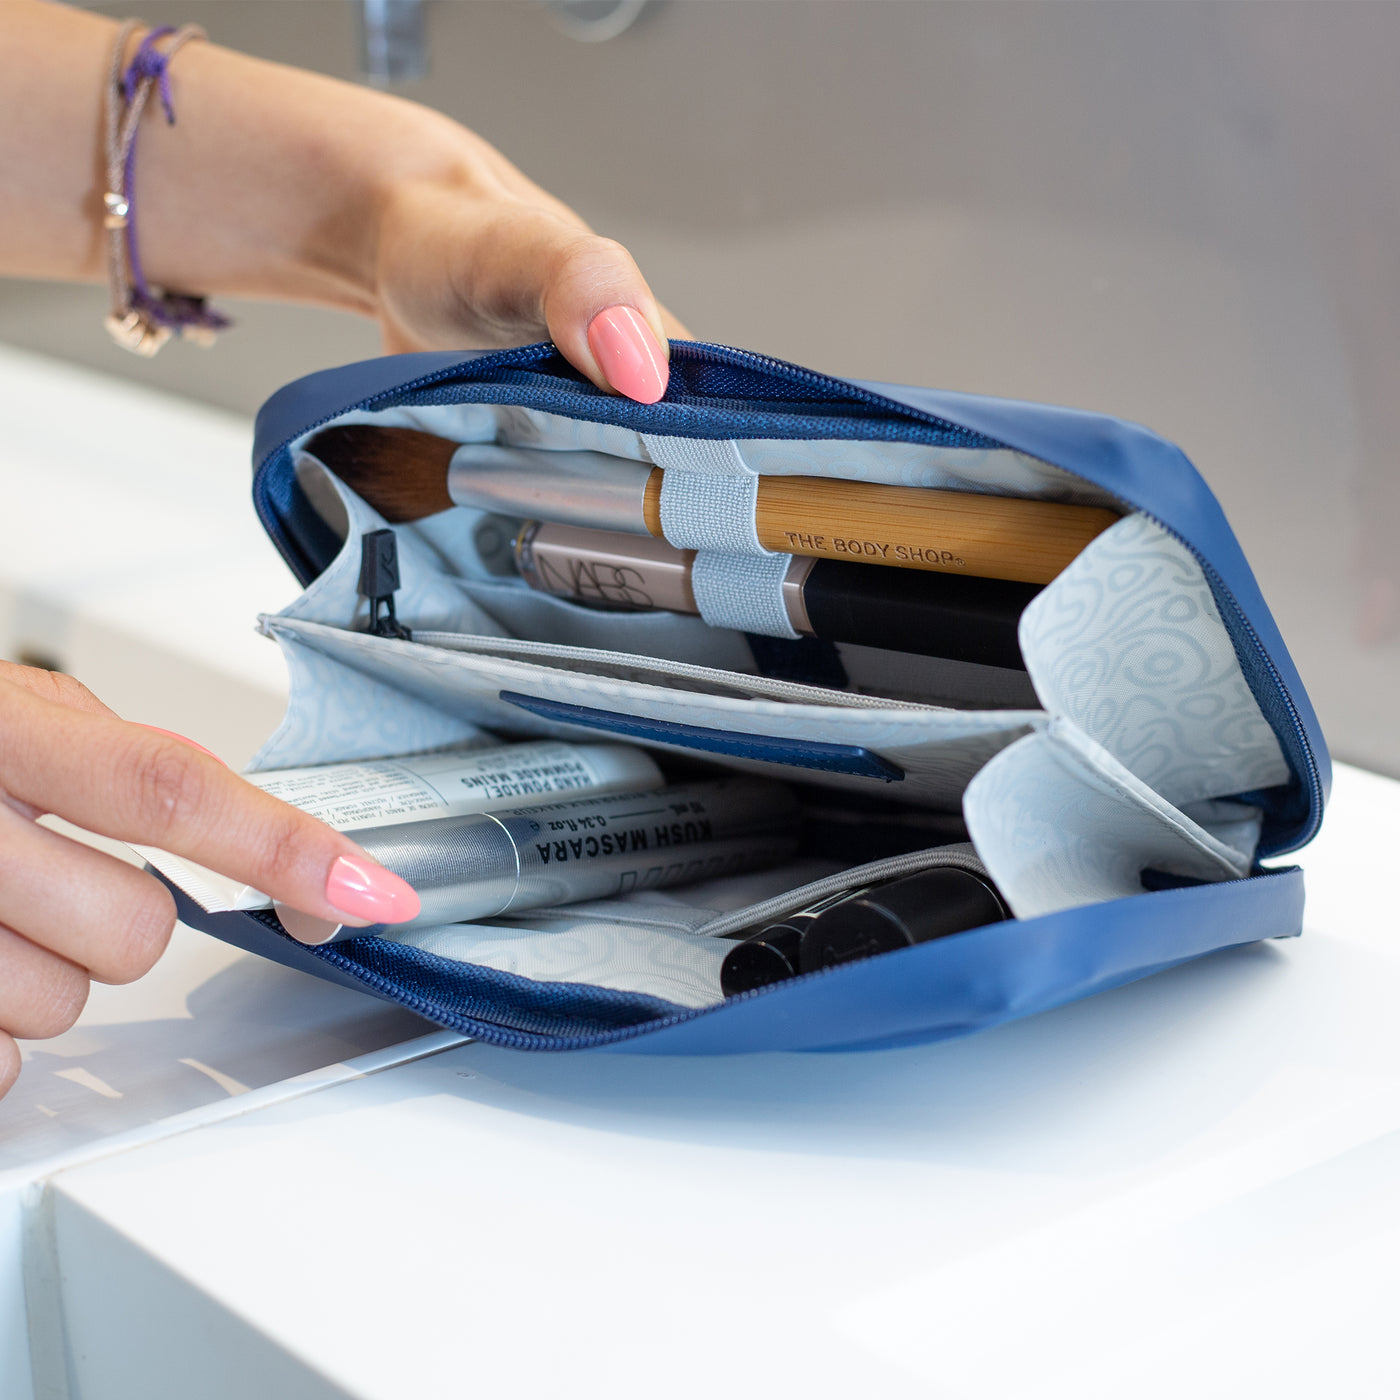 A female in a bathroom packing a range of makeup, cosmetics and toiletries inside a Havelock Blue Eco Essentials Pouch. Inside the range of elastic loops and storage options are visible.